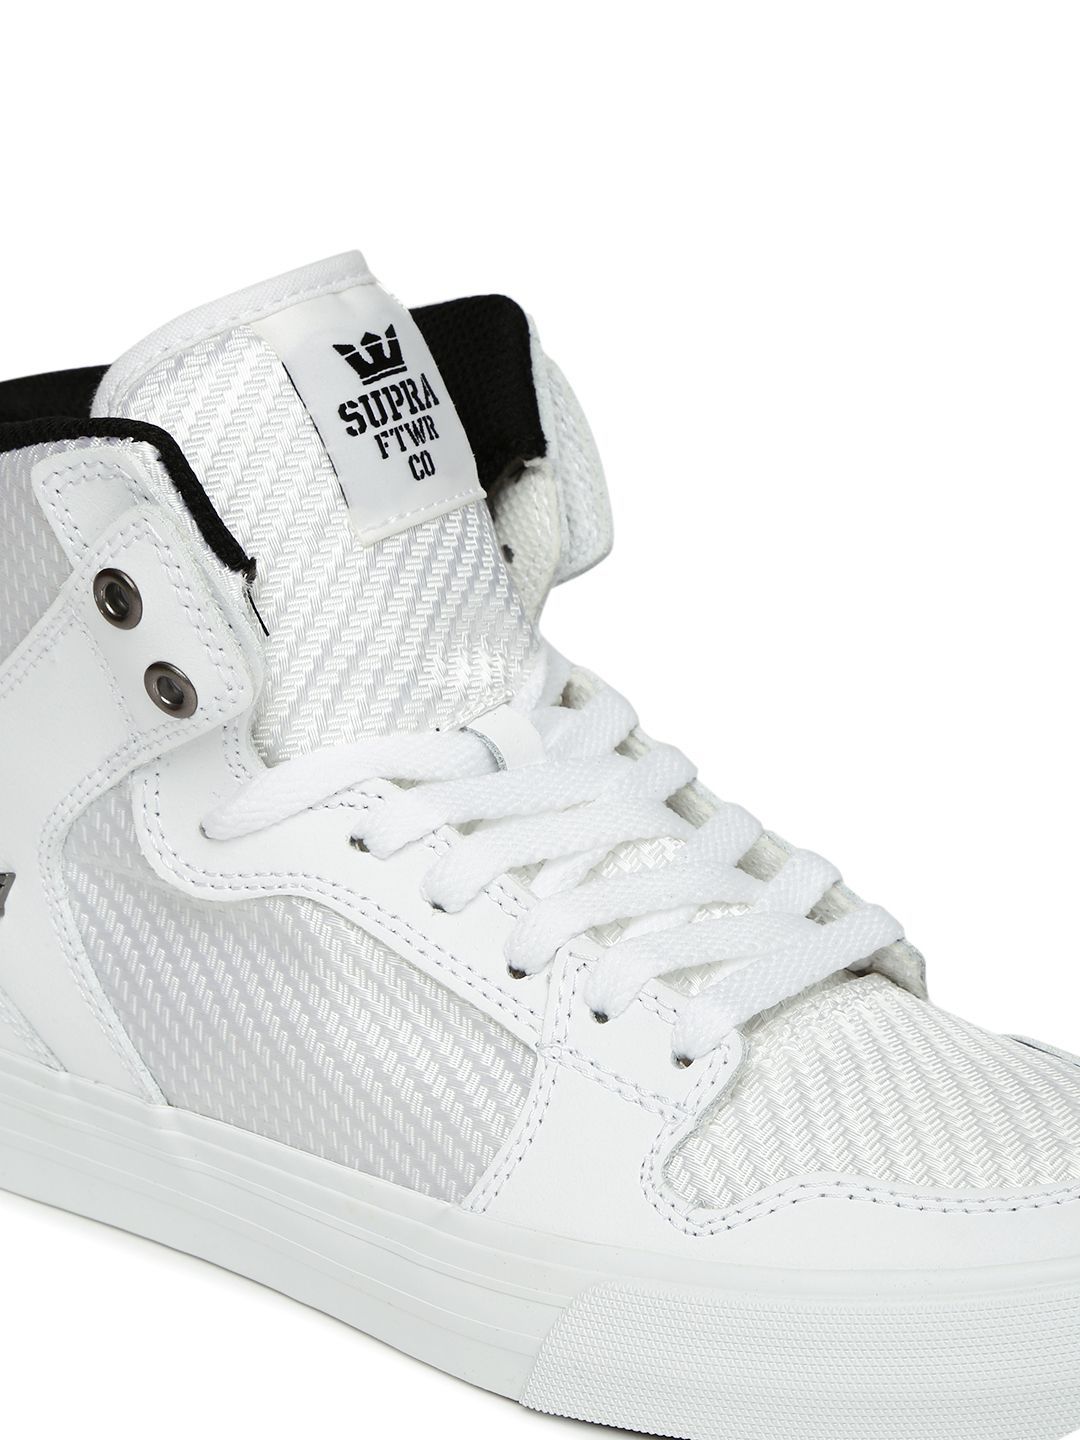 Supra White Casual Shoes - Buy Supra White Casual Shoes Online at Best ...